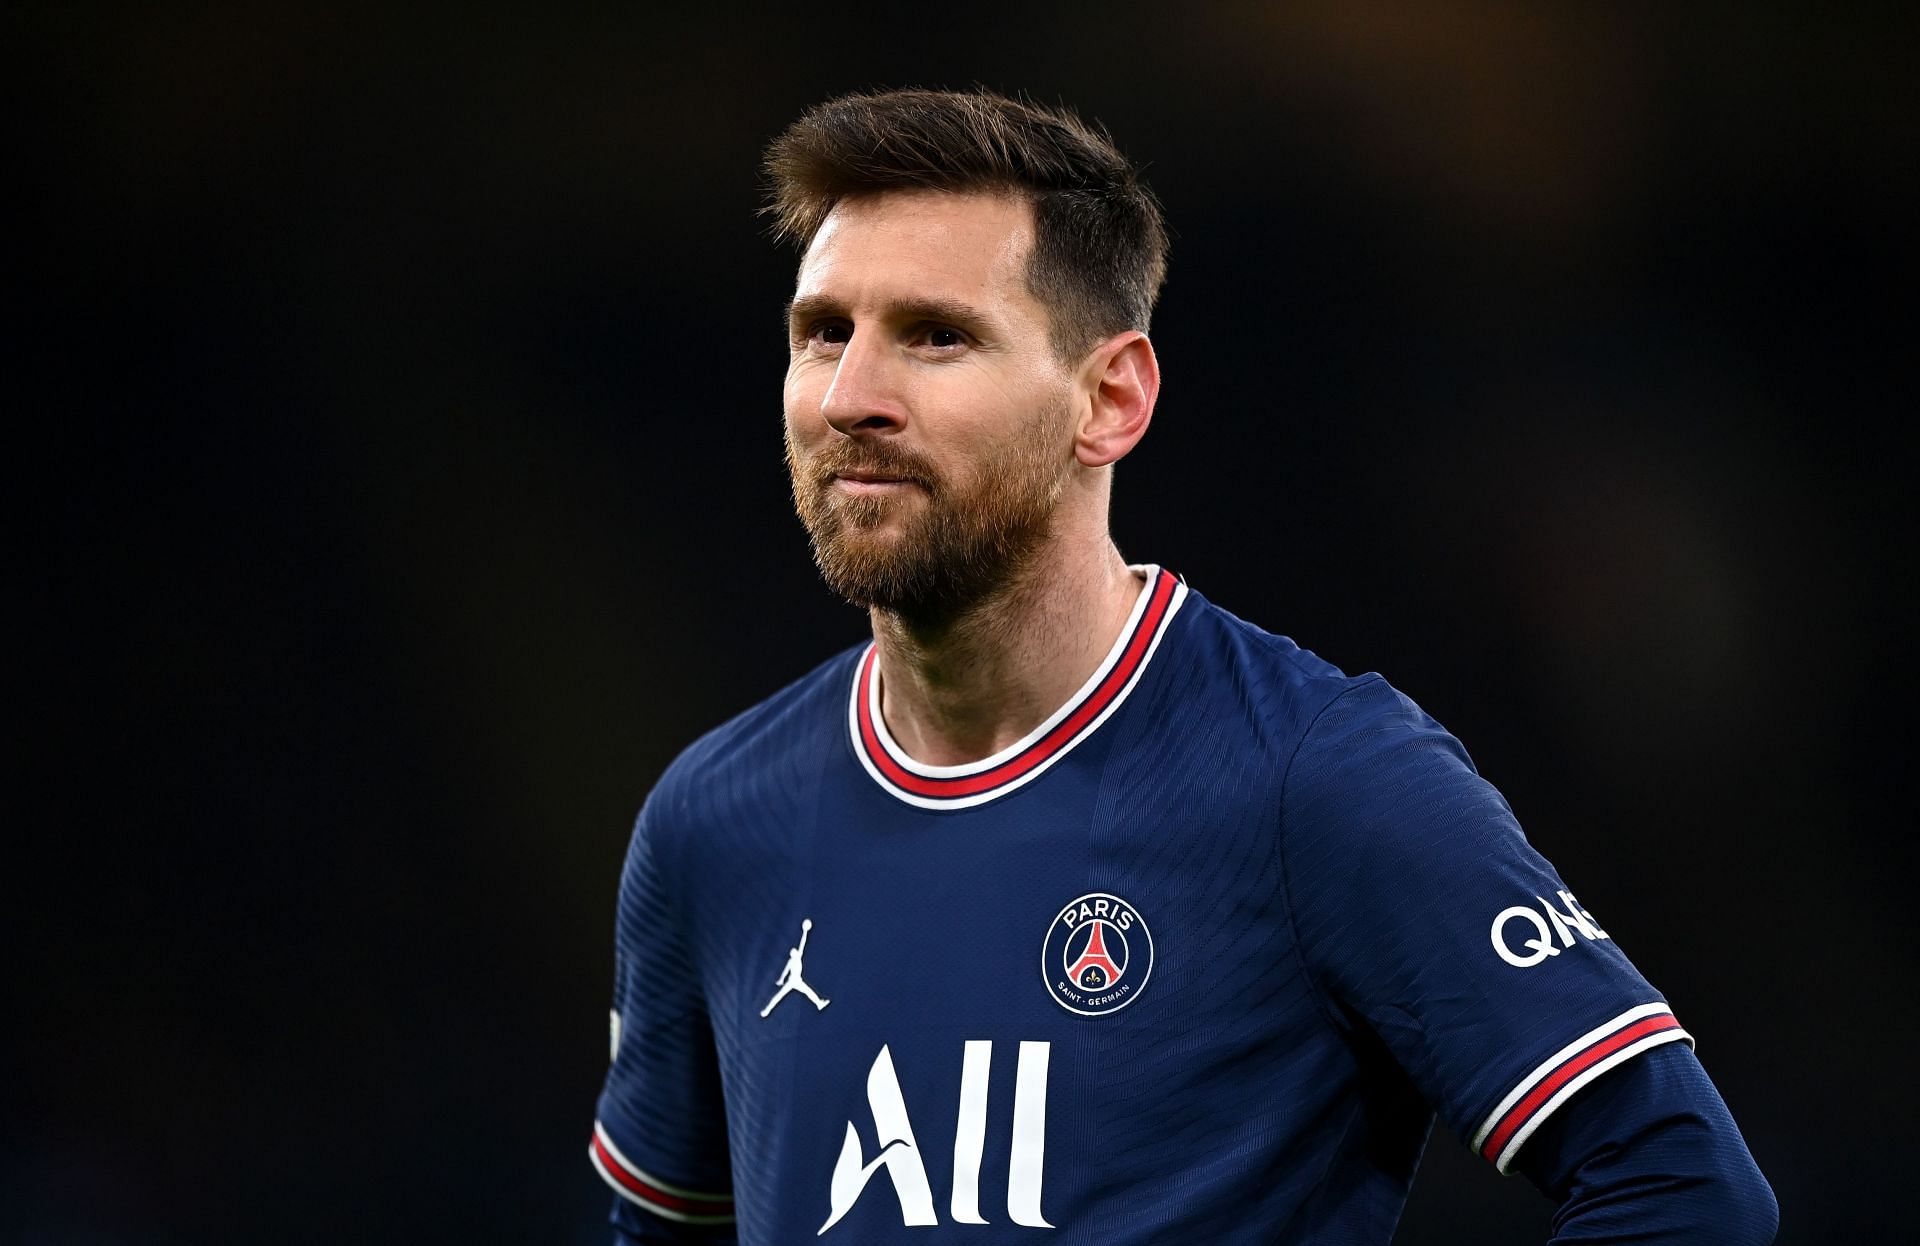 Lionel Messi Has The Second-Worst Conversion Rate In Europe Top 5 League Since Joining PSG